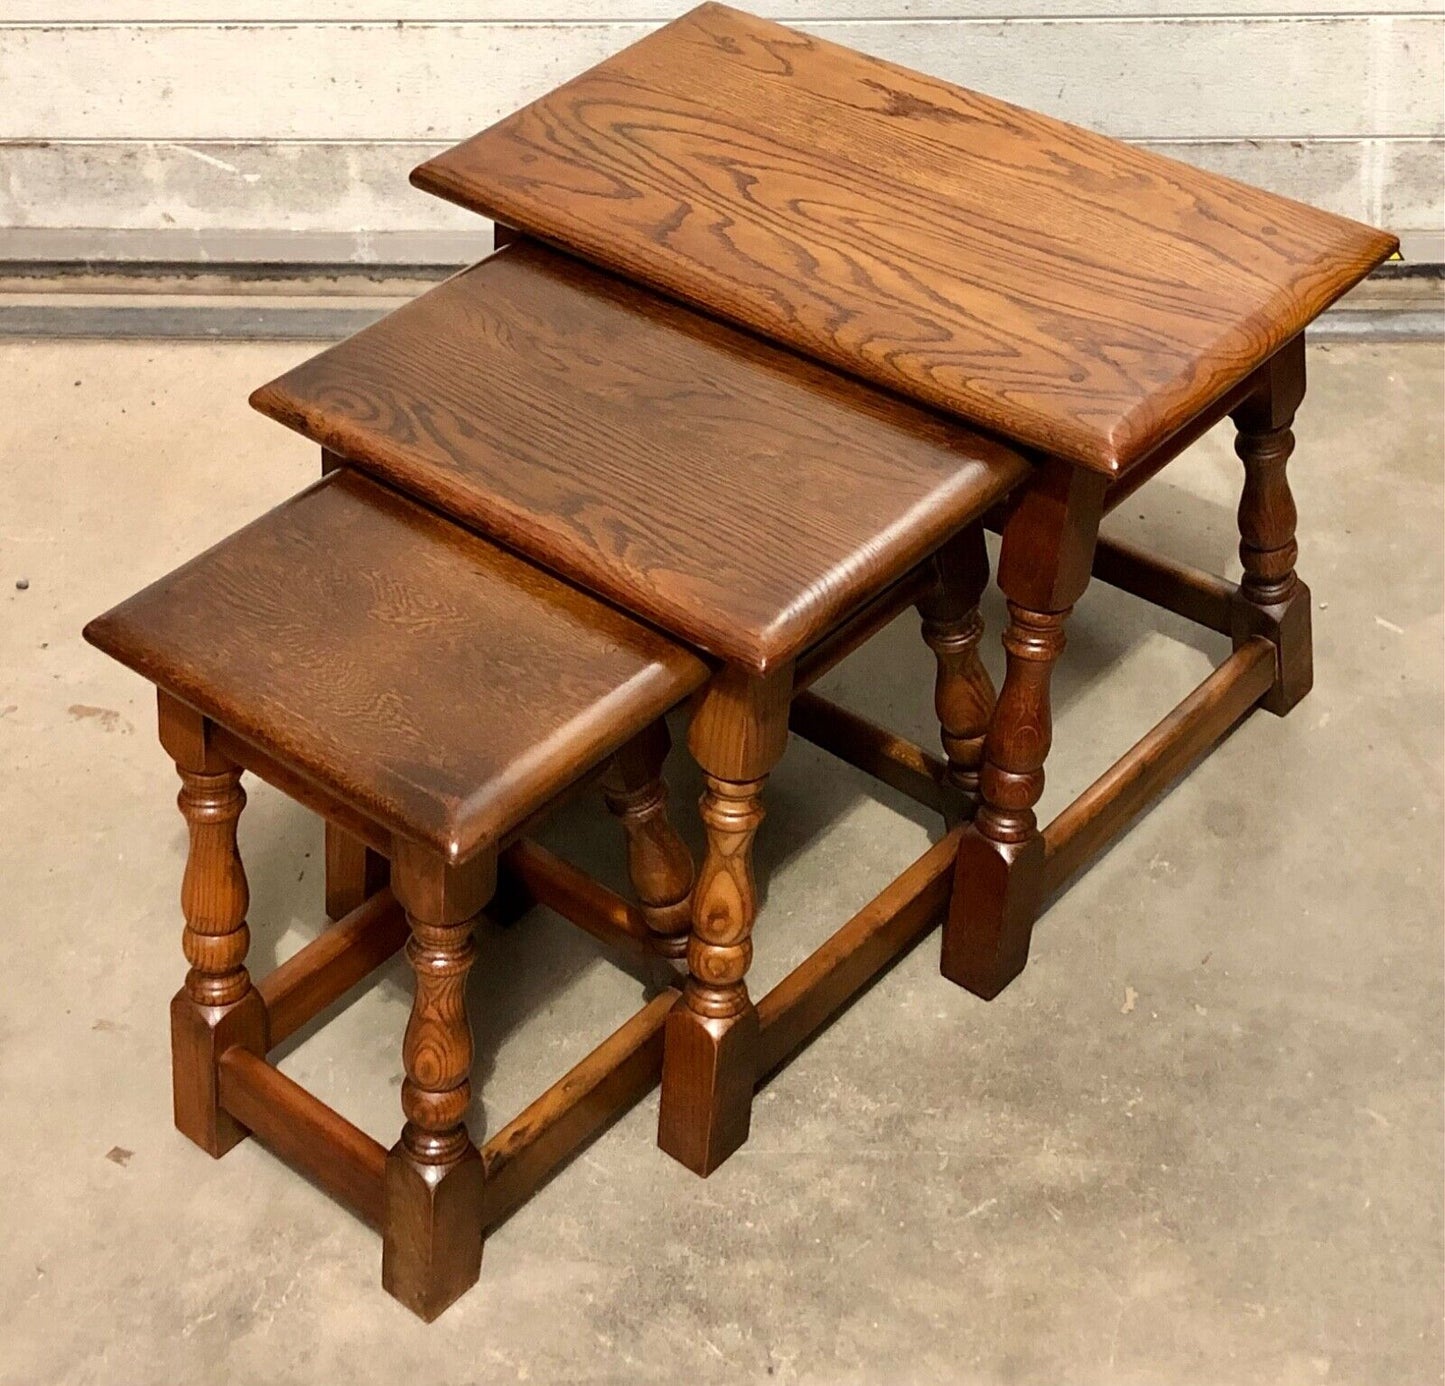 000825....Vintage Solid Oak Nest Of Tables / Coffee Tables ( sold )